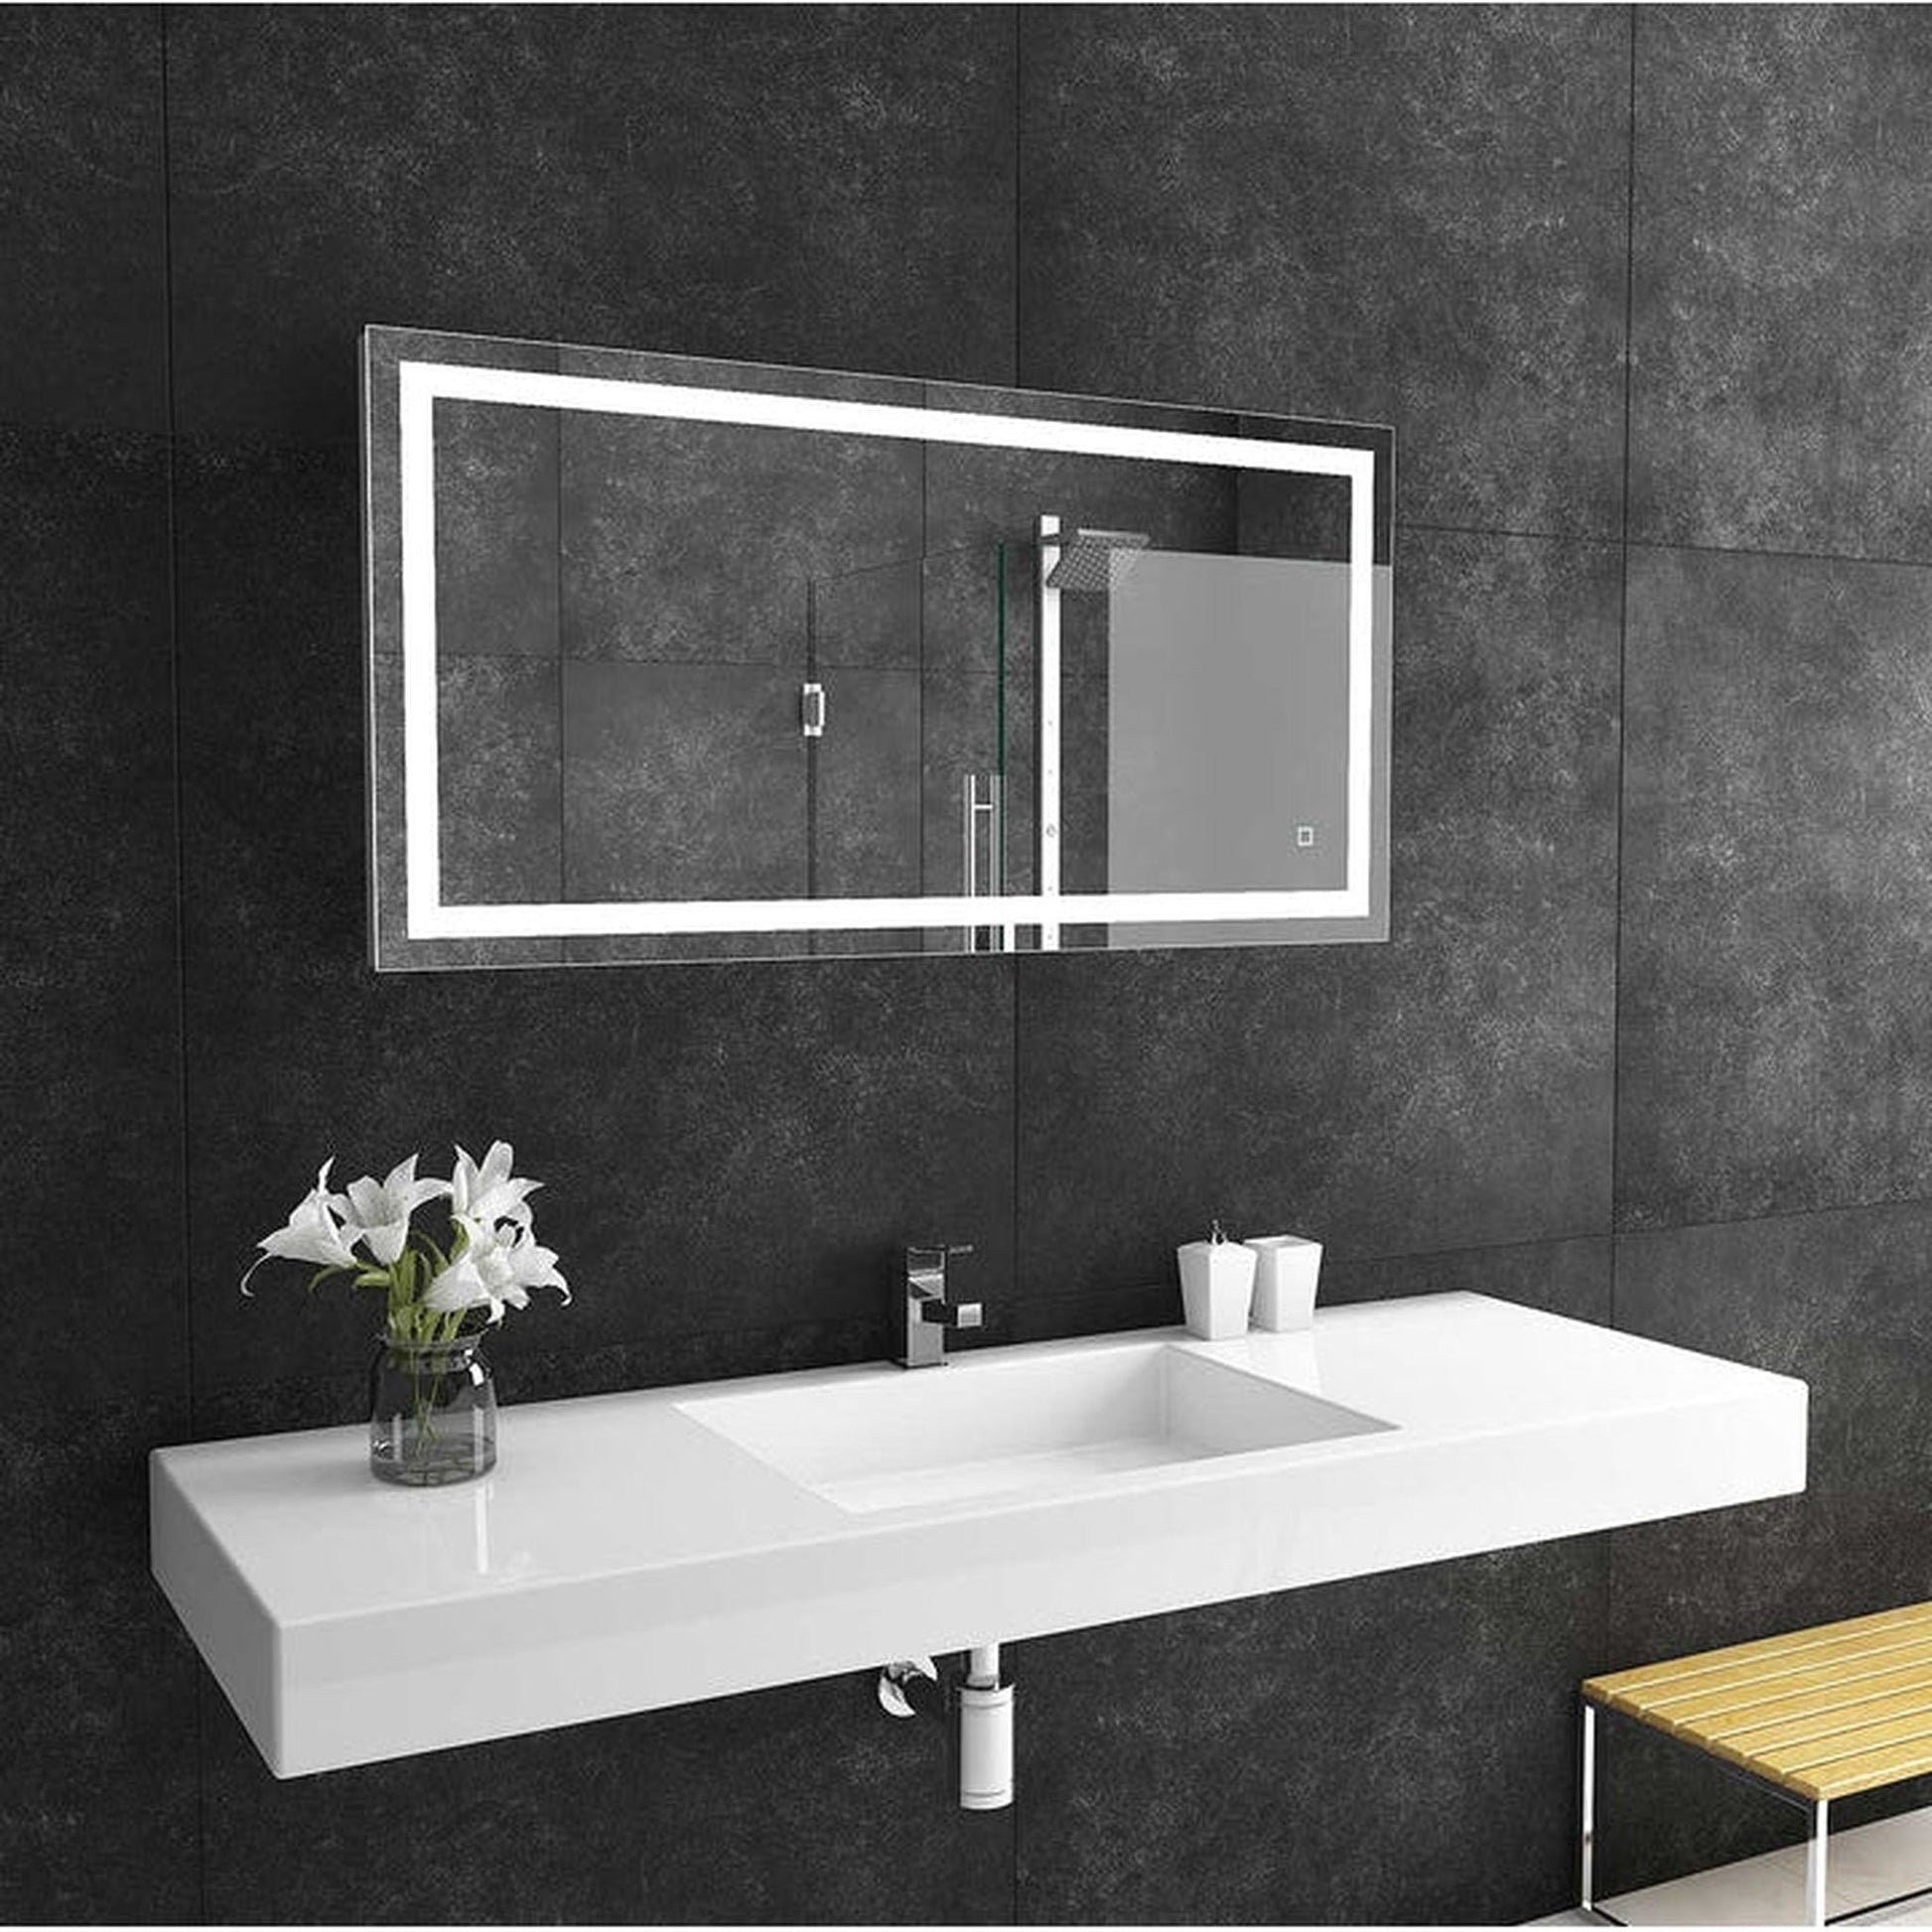 Paris Mirror Liberty 48" x 24" Front-Lit Lighted Super Bright Dimmable Wall-Mounted 6000K LED Mirror With Integrated Defogger System